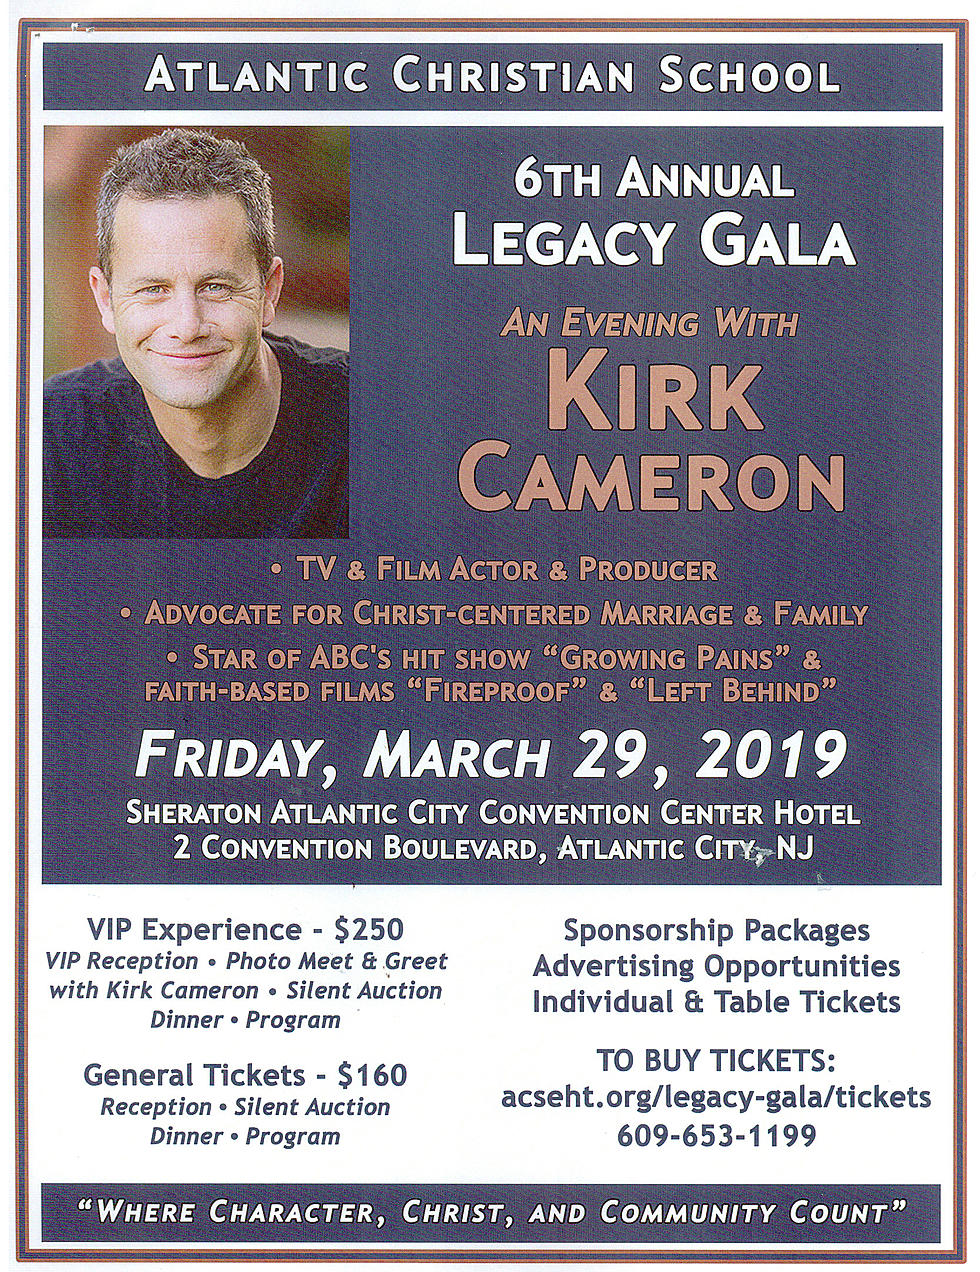 6th Annual Legacy Gala – An Evening With Kirk Cameron